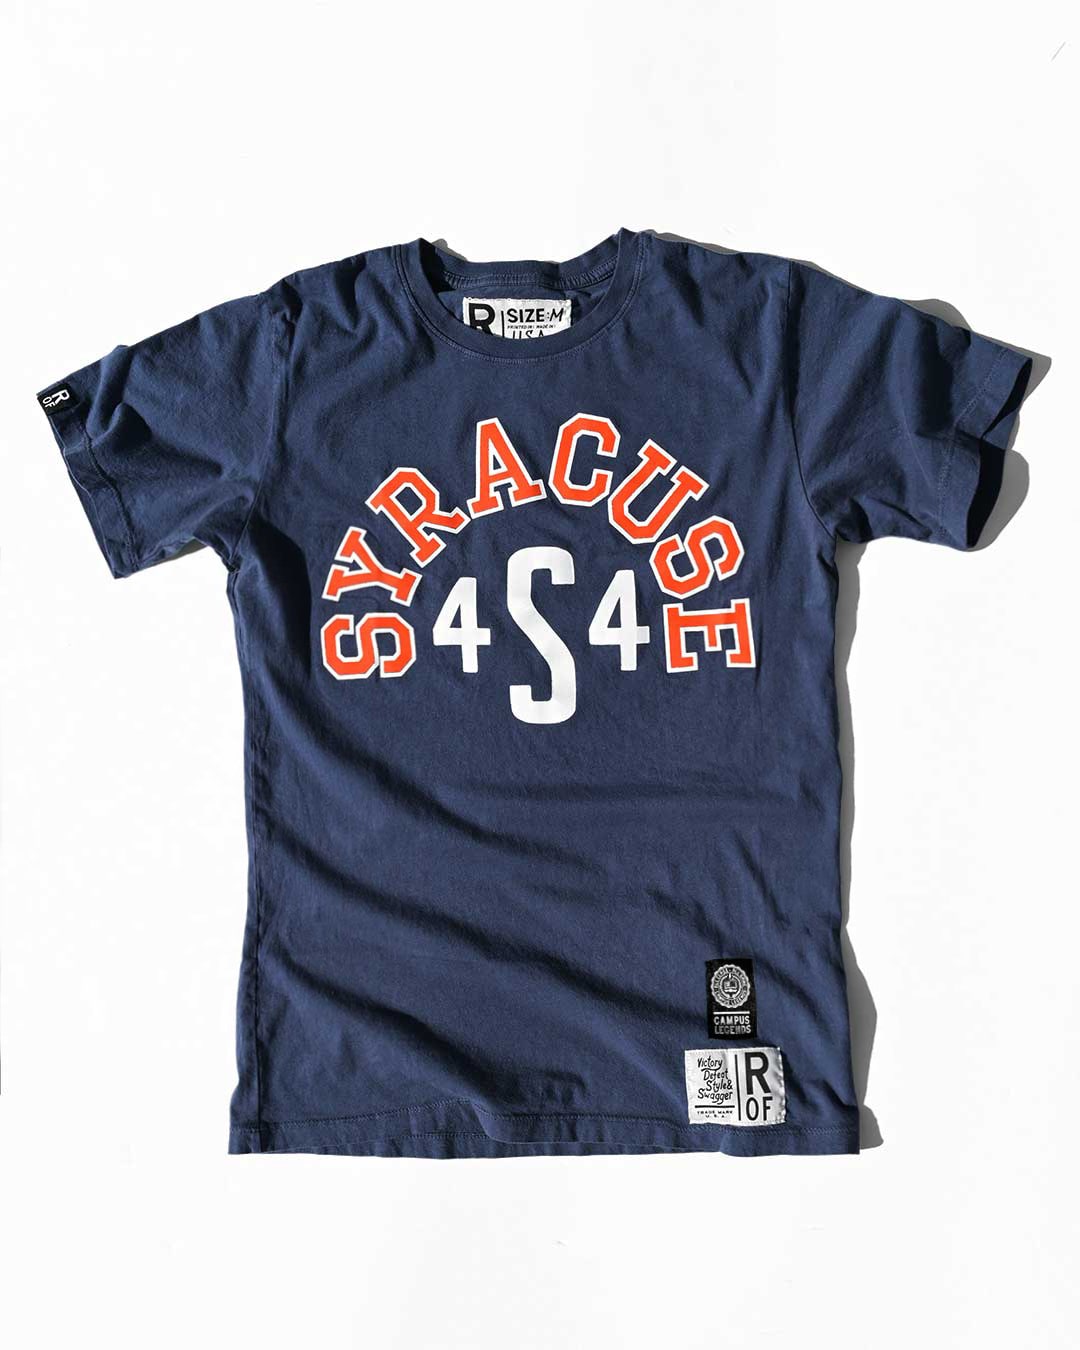 Syracuse Navy Tee - Roots of Fight